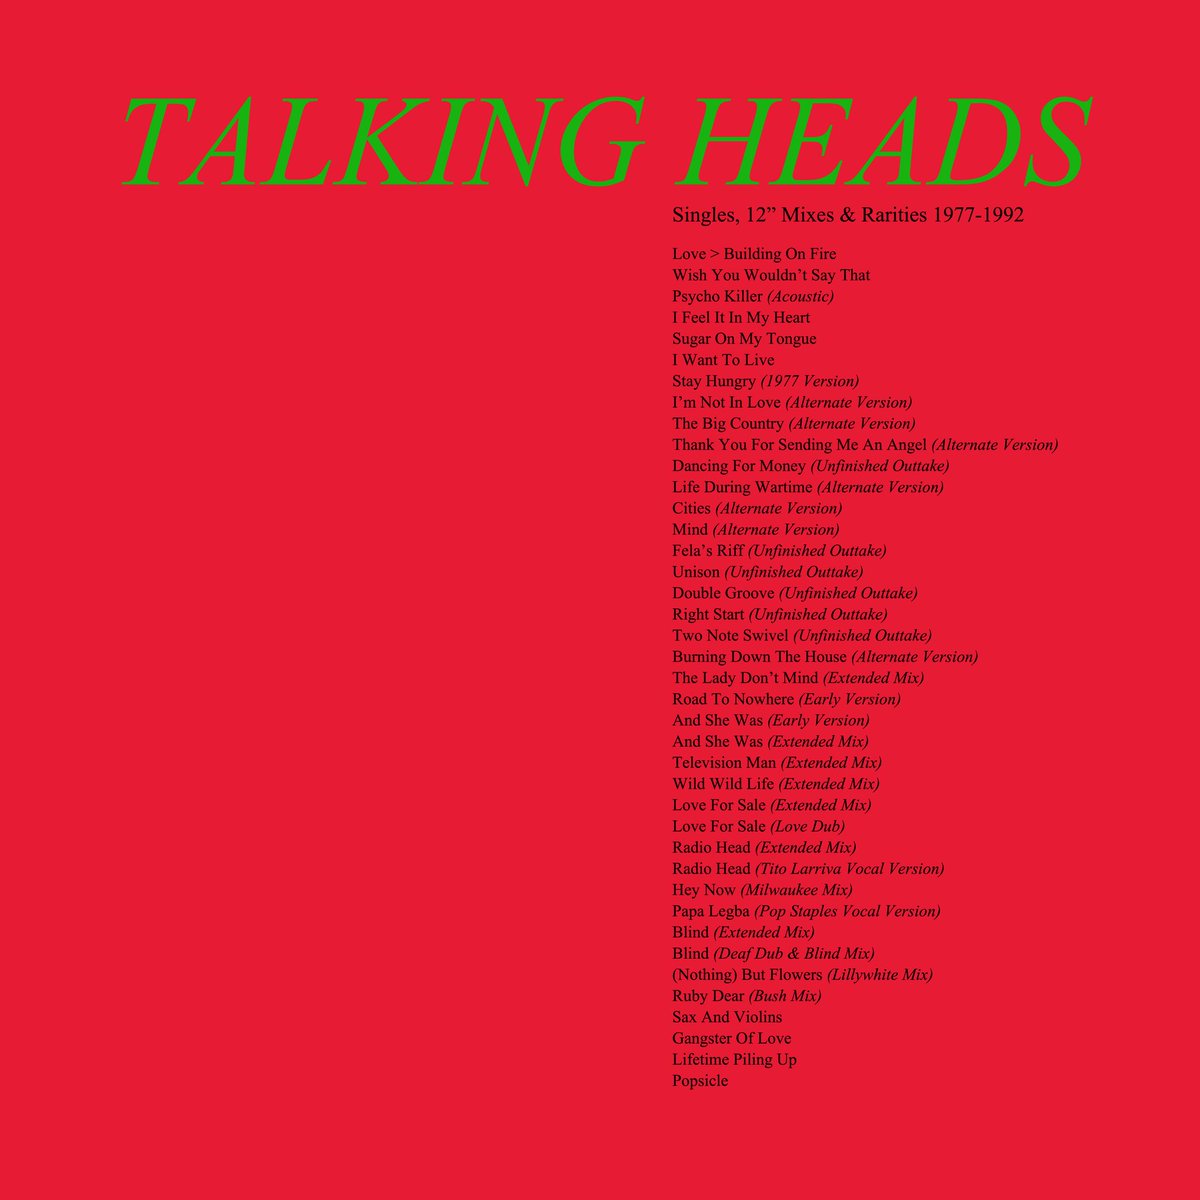 #TalkingHeadsAnthology Starts 1st May. Challenge details and Day 1 playlist👇 Singles, 12” Mixes & Rarities 1977-1992 open.spotify.com/playlist/2nUnl…